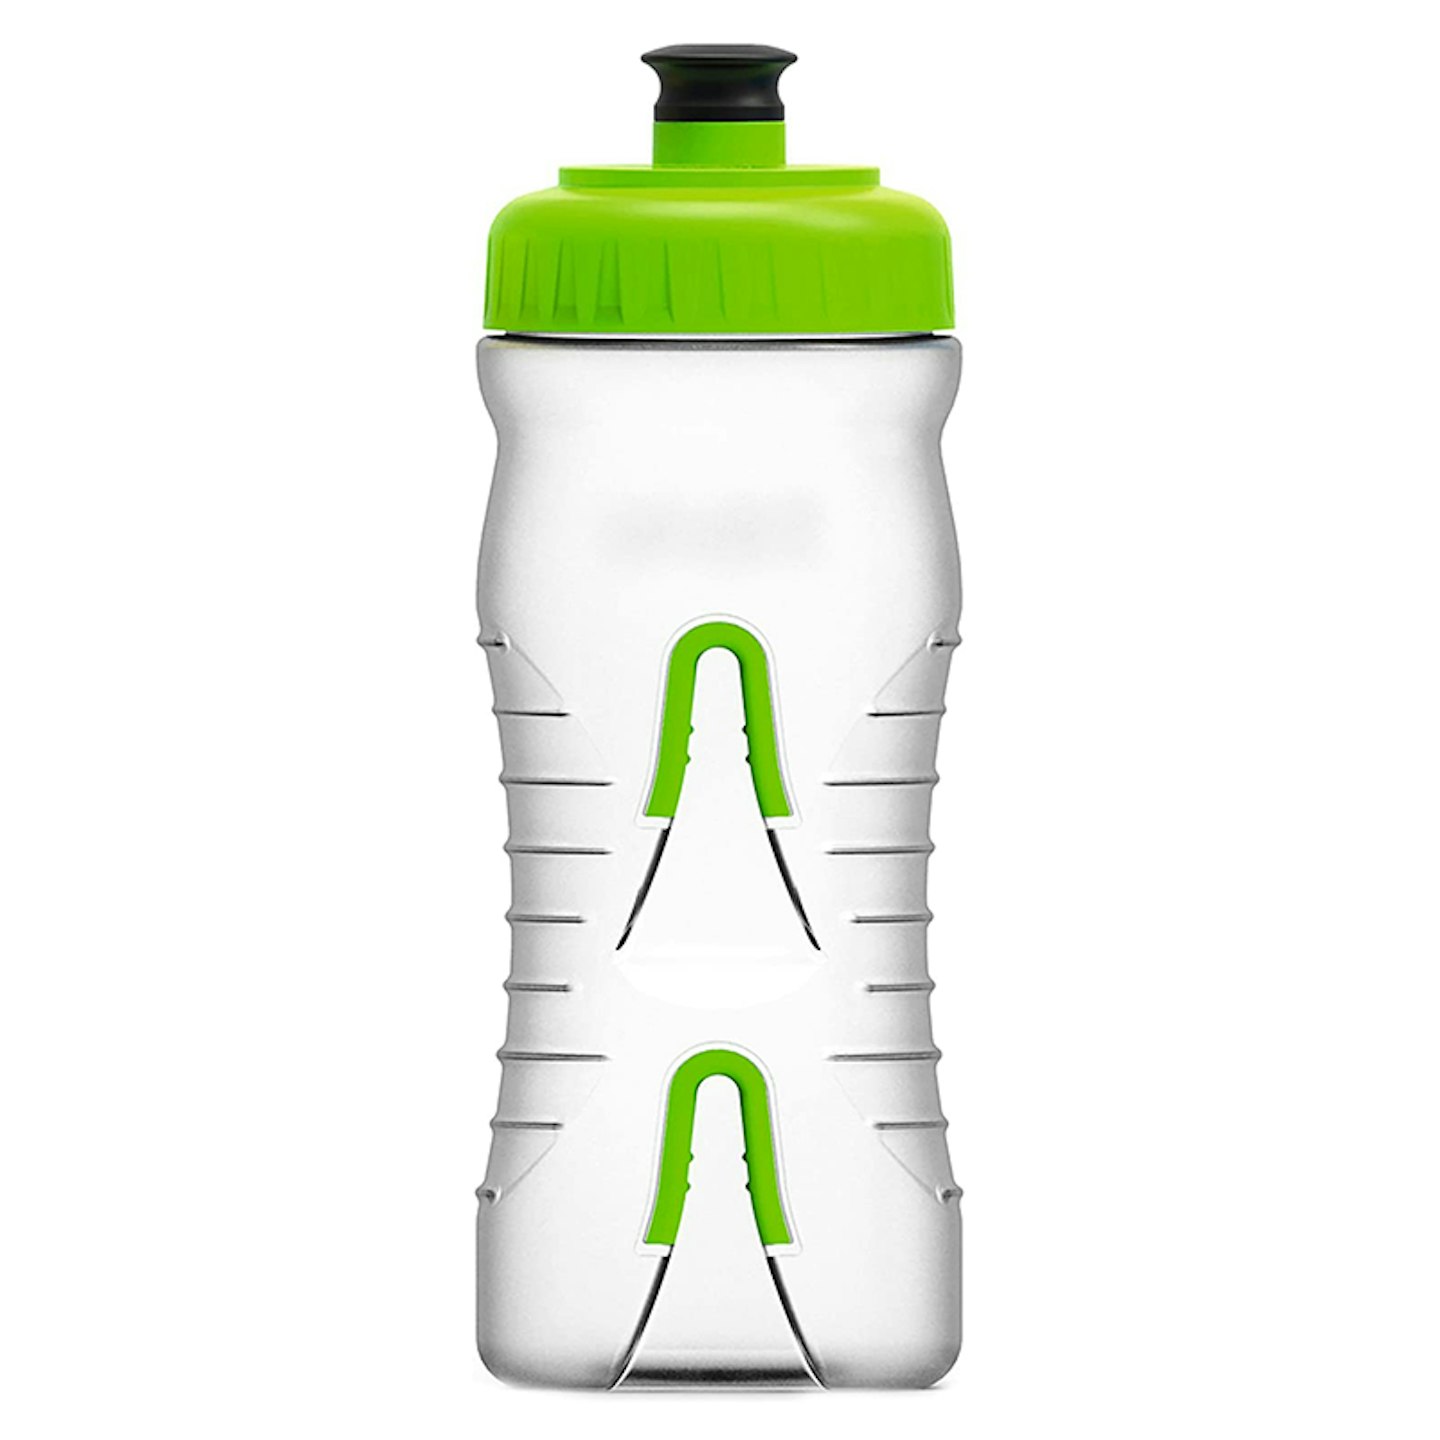 Fabric Cageless Bottle